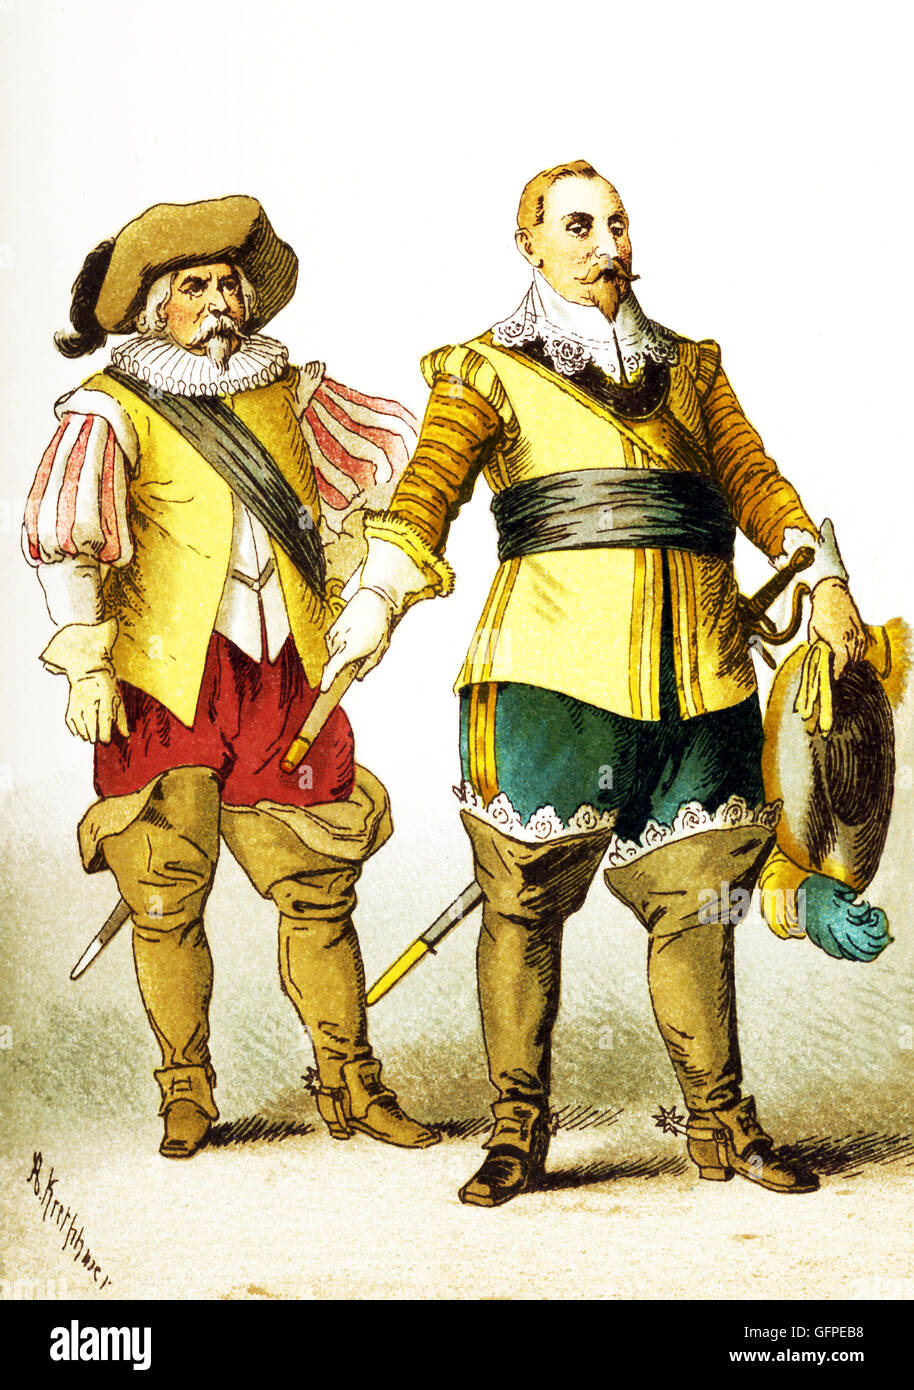 The figures shown here represent, from left to right, are: a Swede and Swedish king Gustavus Adolphus (died 1632).The illustration dates to 1882. Stock Photo